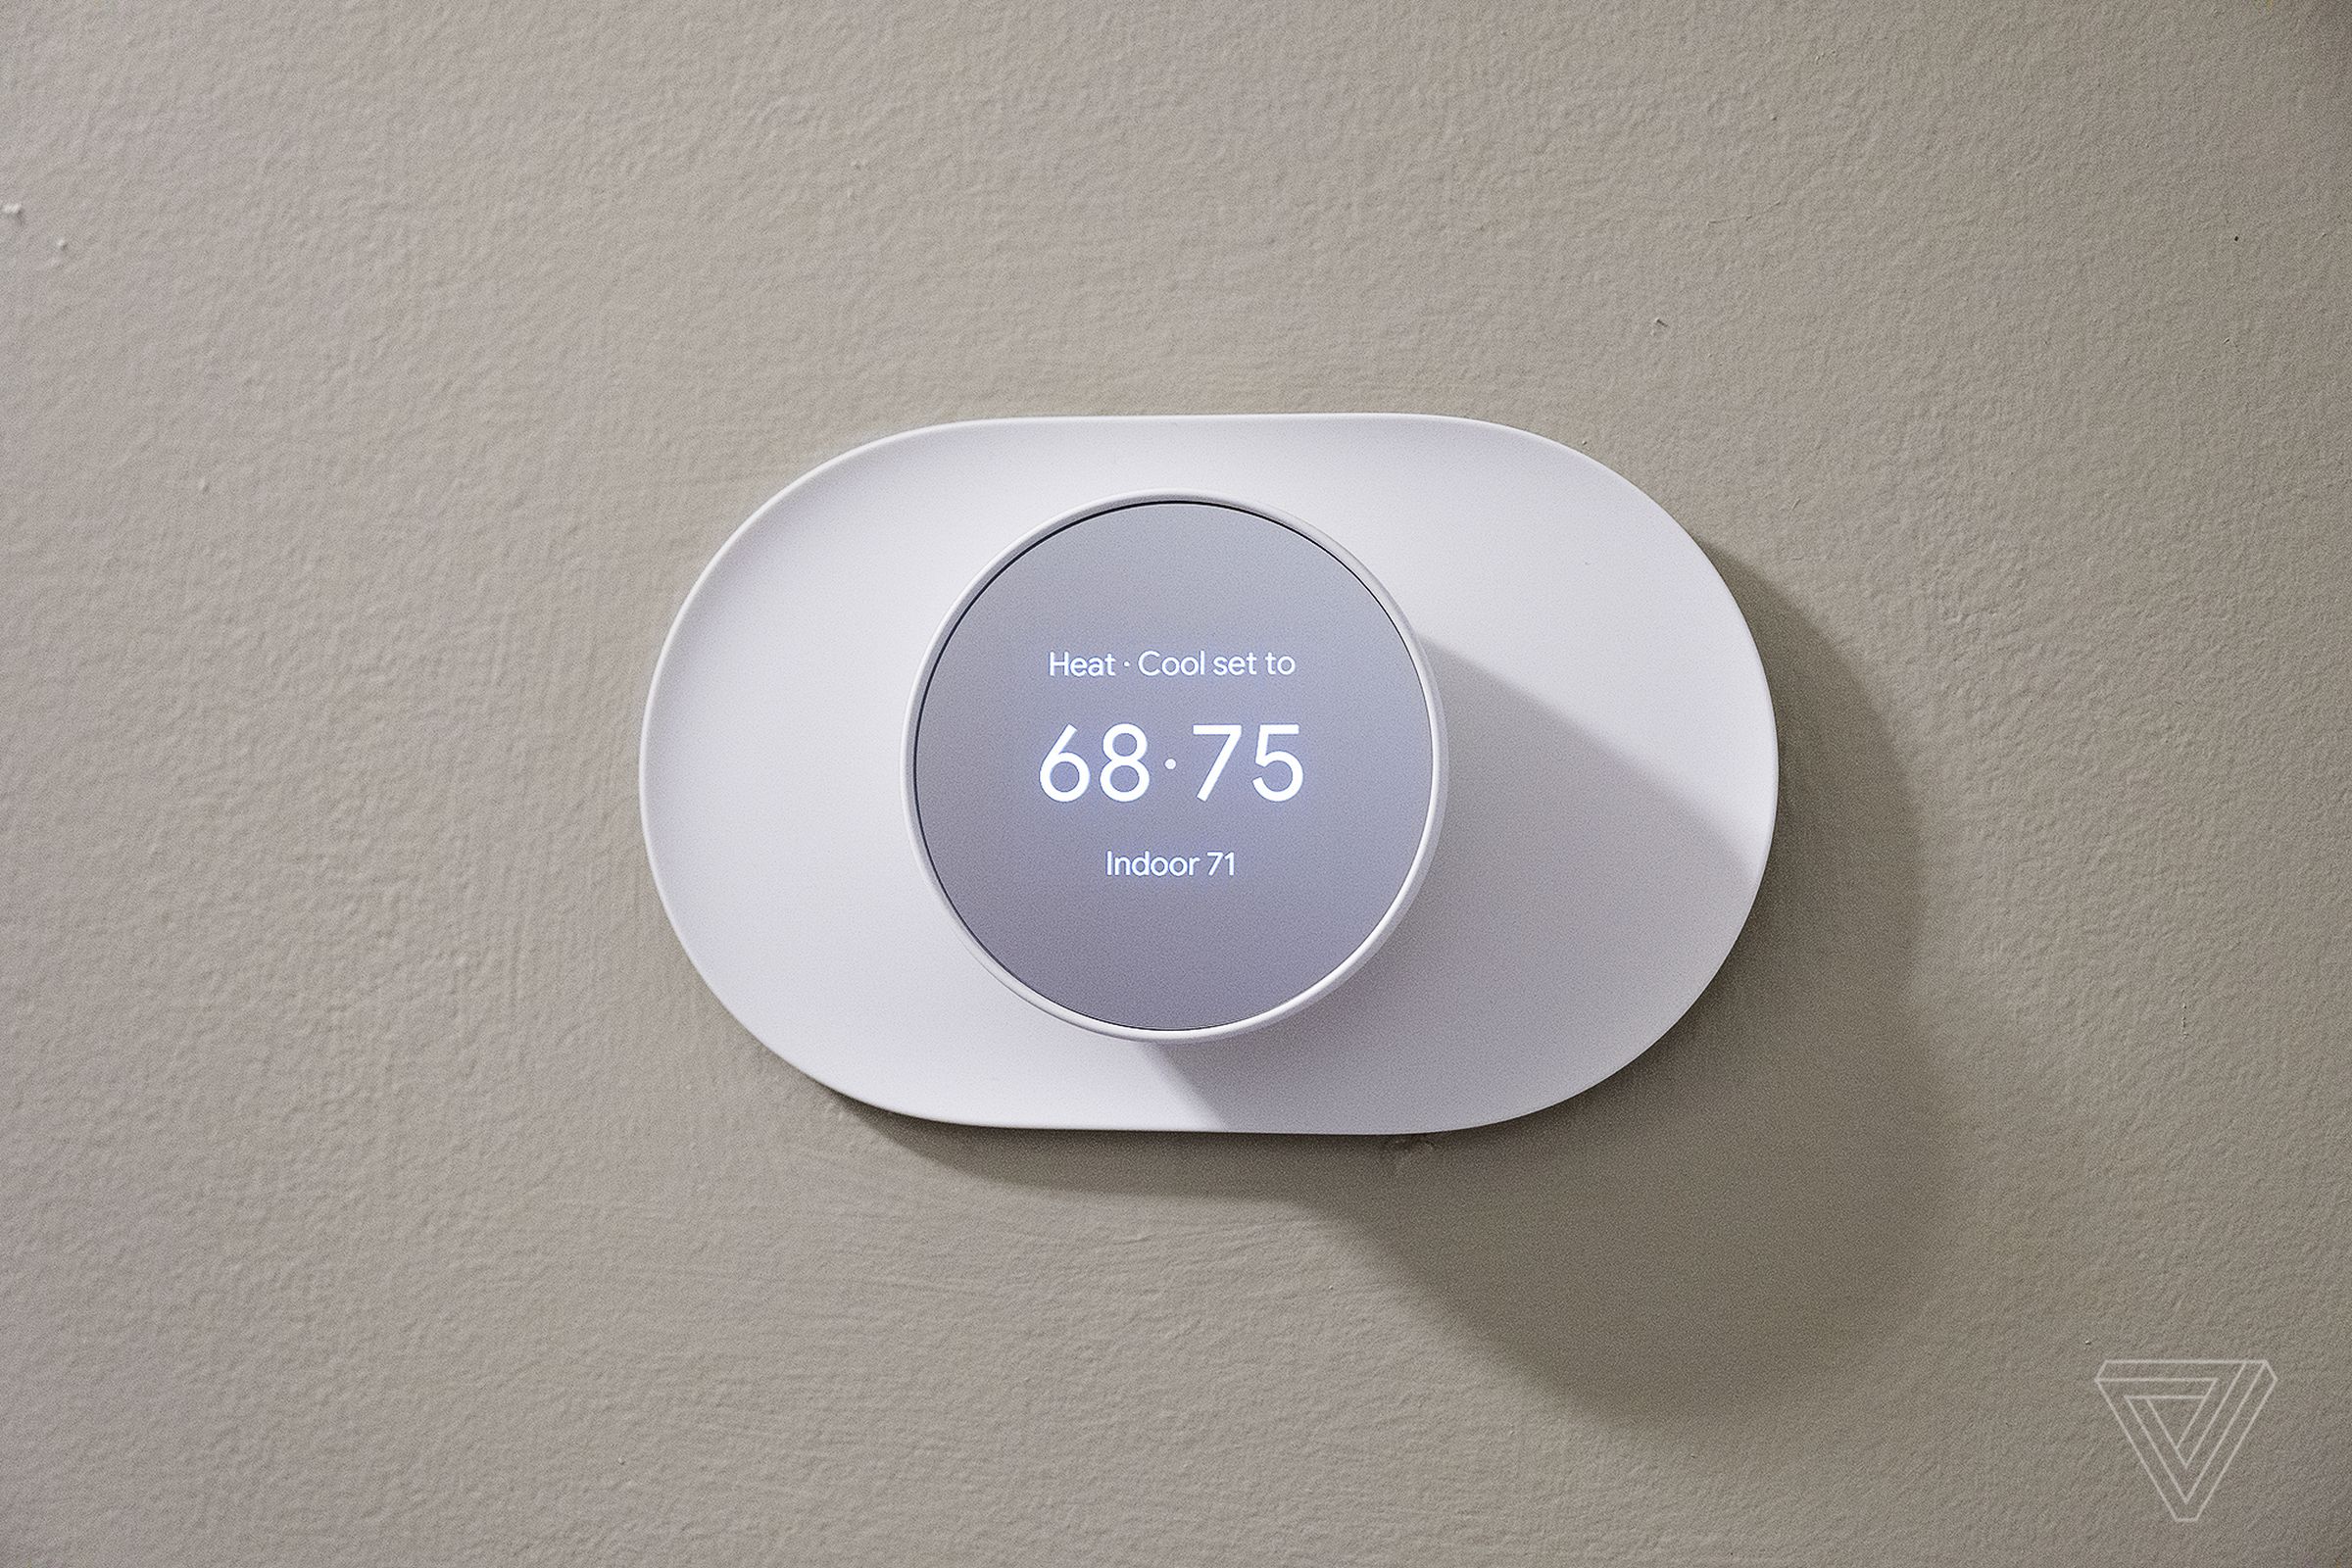 The Nest Smart Thermostat.